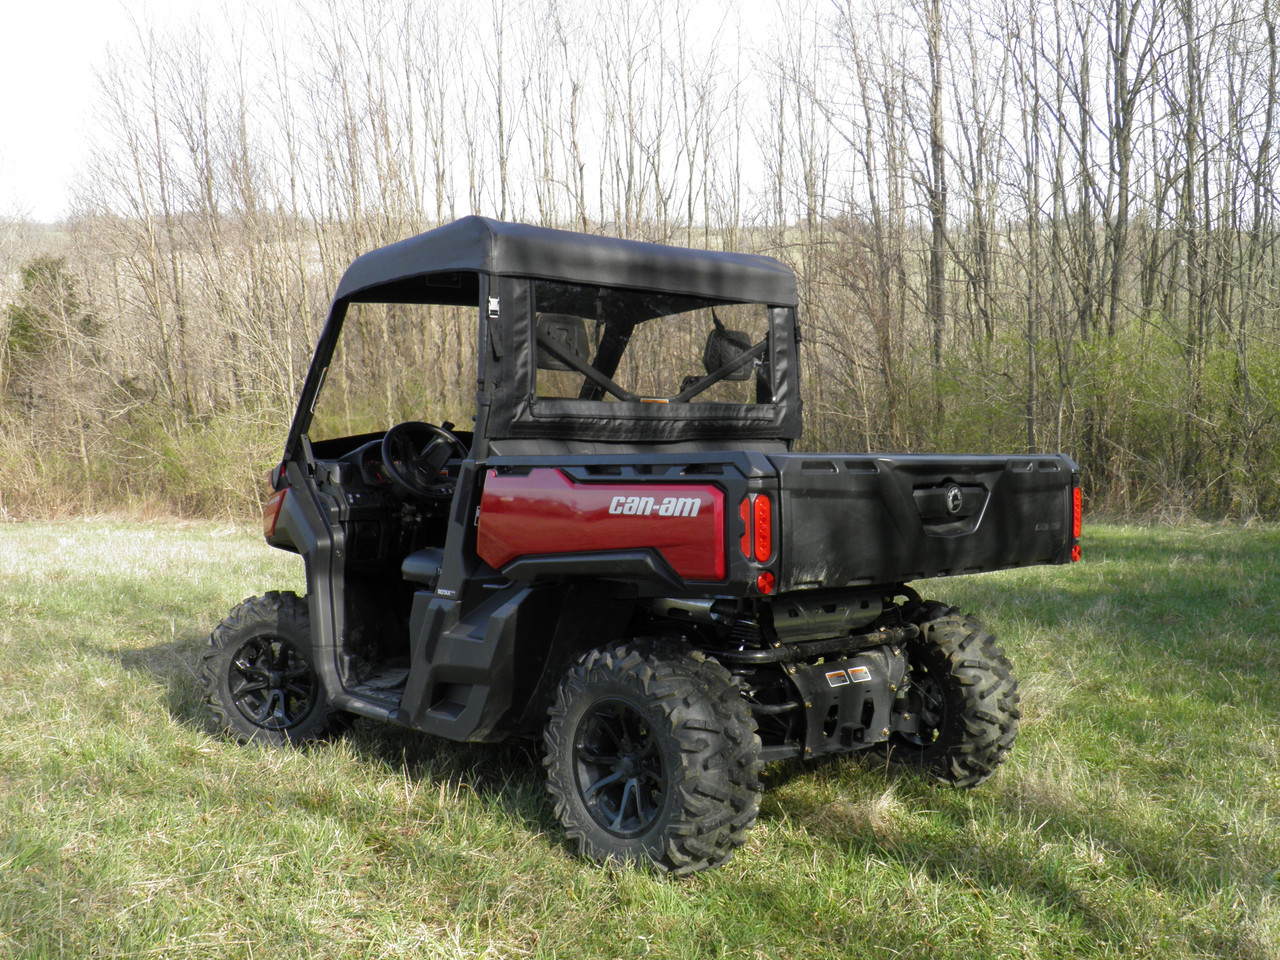 3 Star side x side can-am defender vinyl windshield roof and rear window rear and side angle view